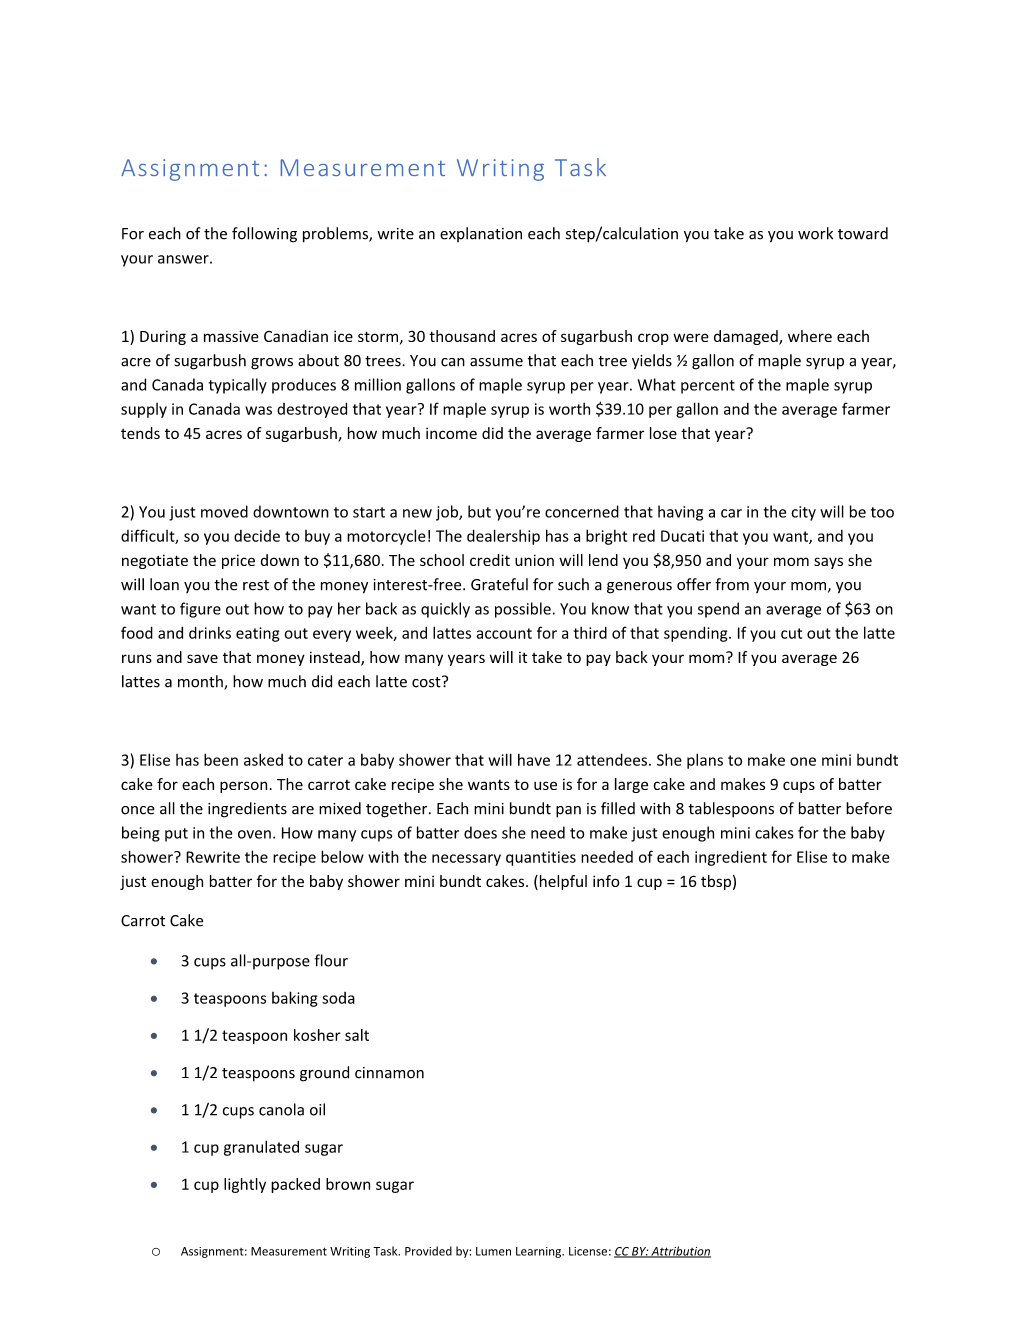 Assignment: Measurement Writing Task